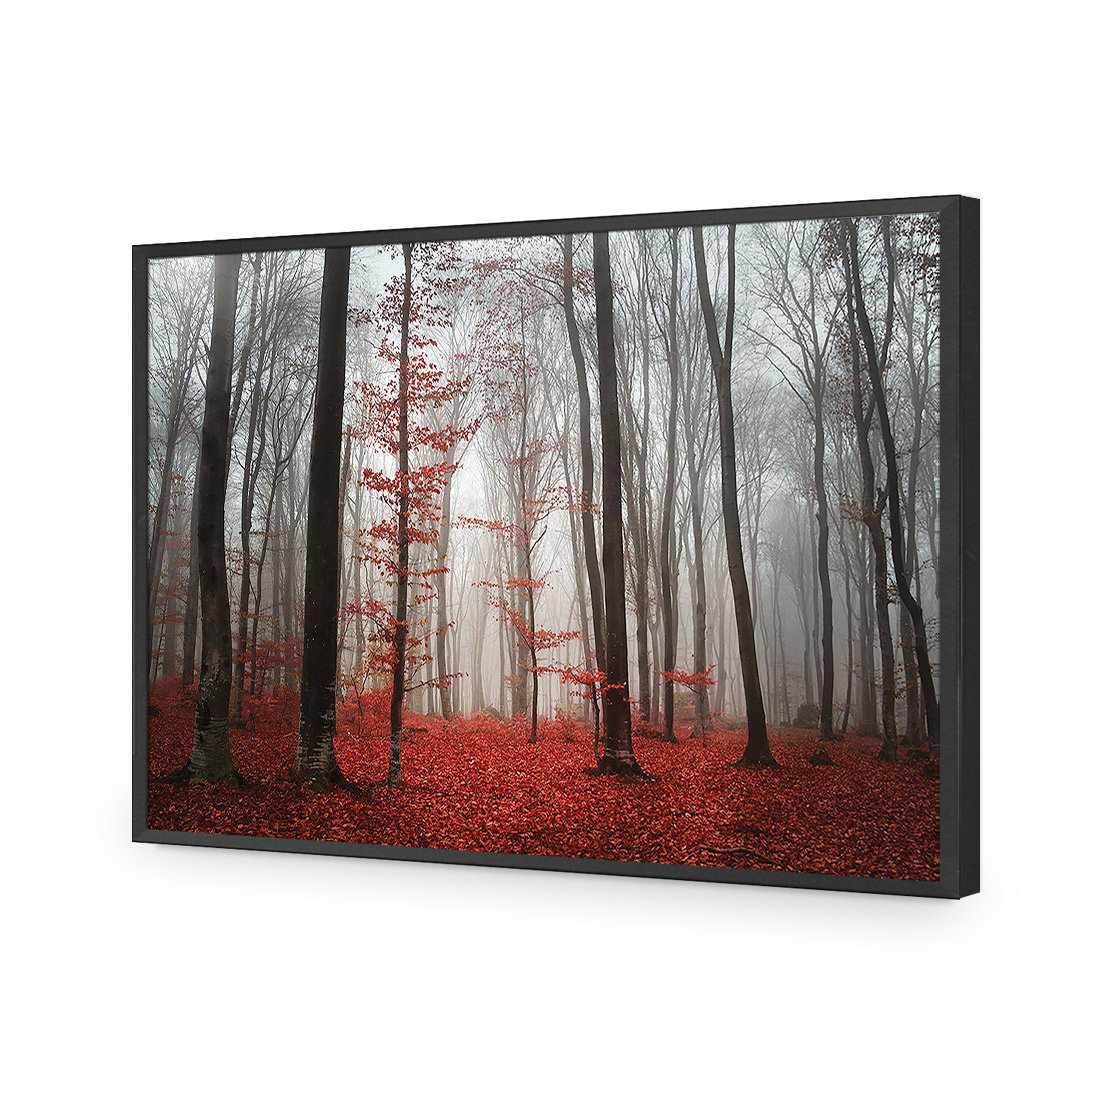 Scarlet Forest-Acrylic-Wall Art Design-Without Border-Acrylic - Black Frame-45x30cm-Wall Art Designs